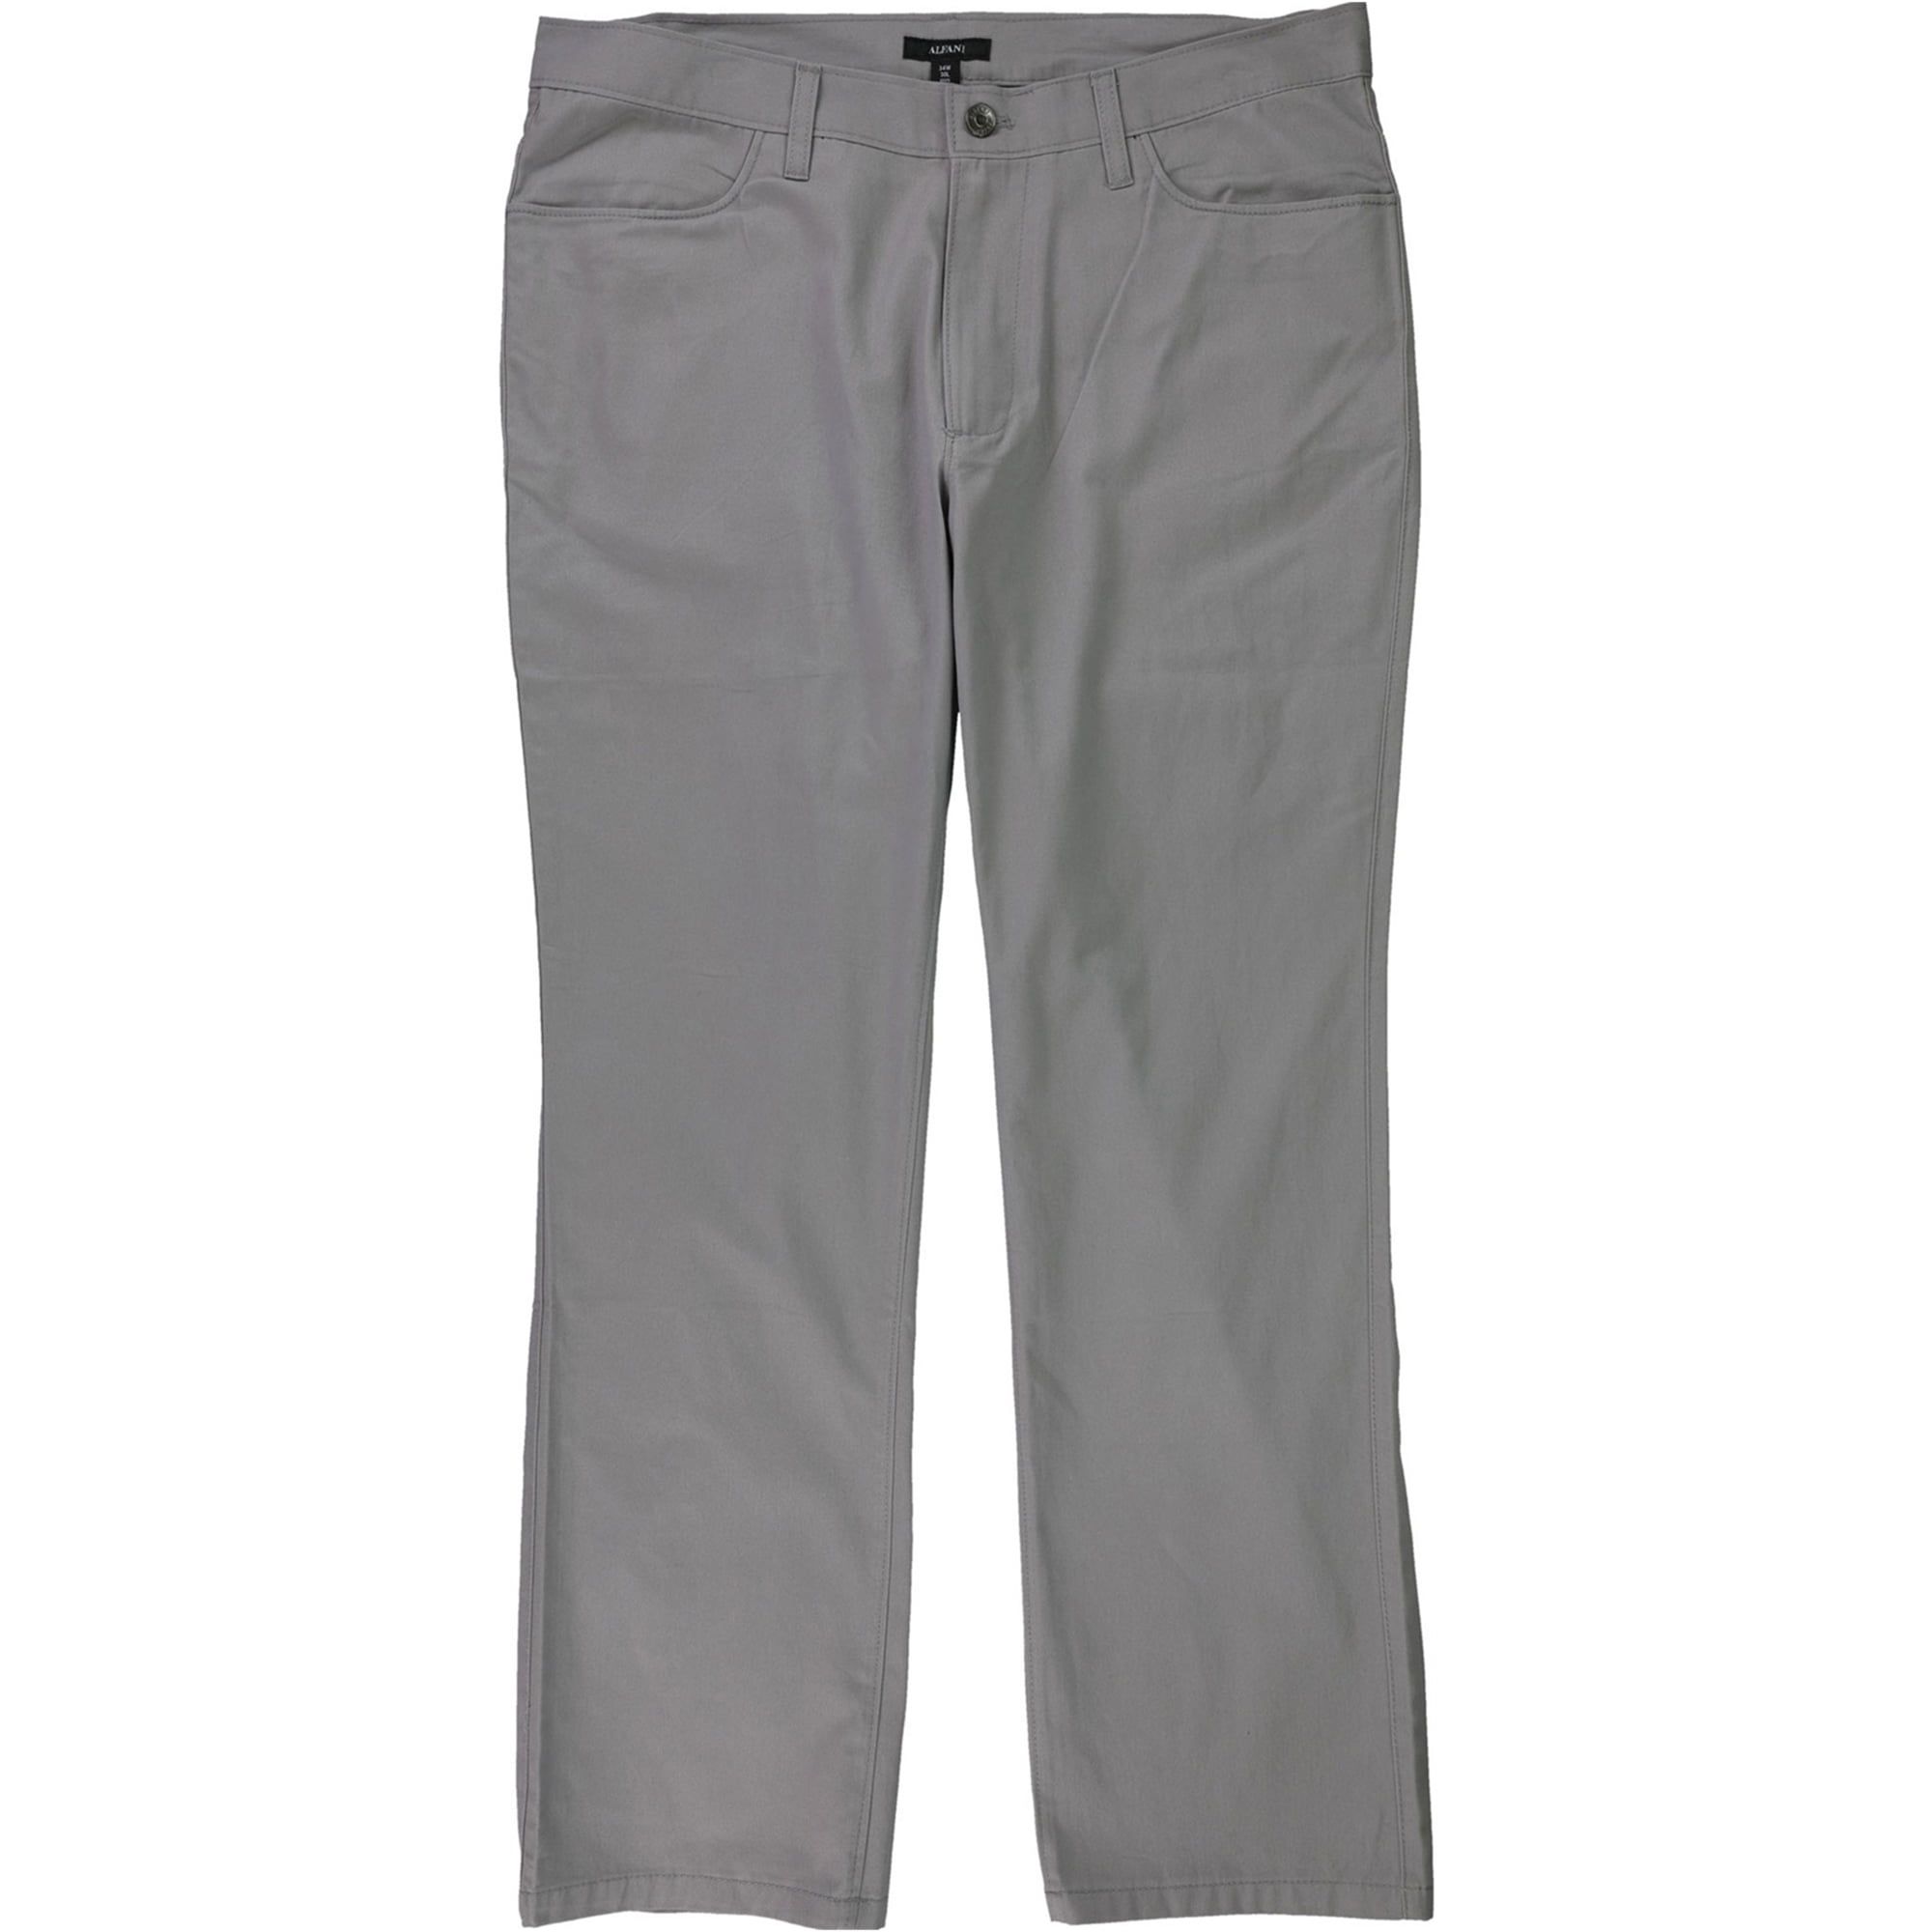 Grey Slacks and Chinos Casual trousers and trousers adidas Originals 3-stripes Cargo Cotton Ripstop Pants in Light Grey Mens Clothing Trousers for Men 